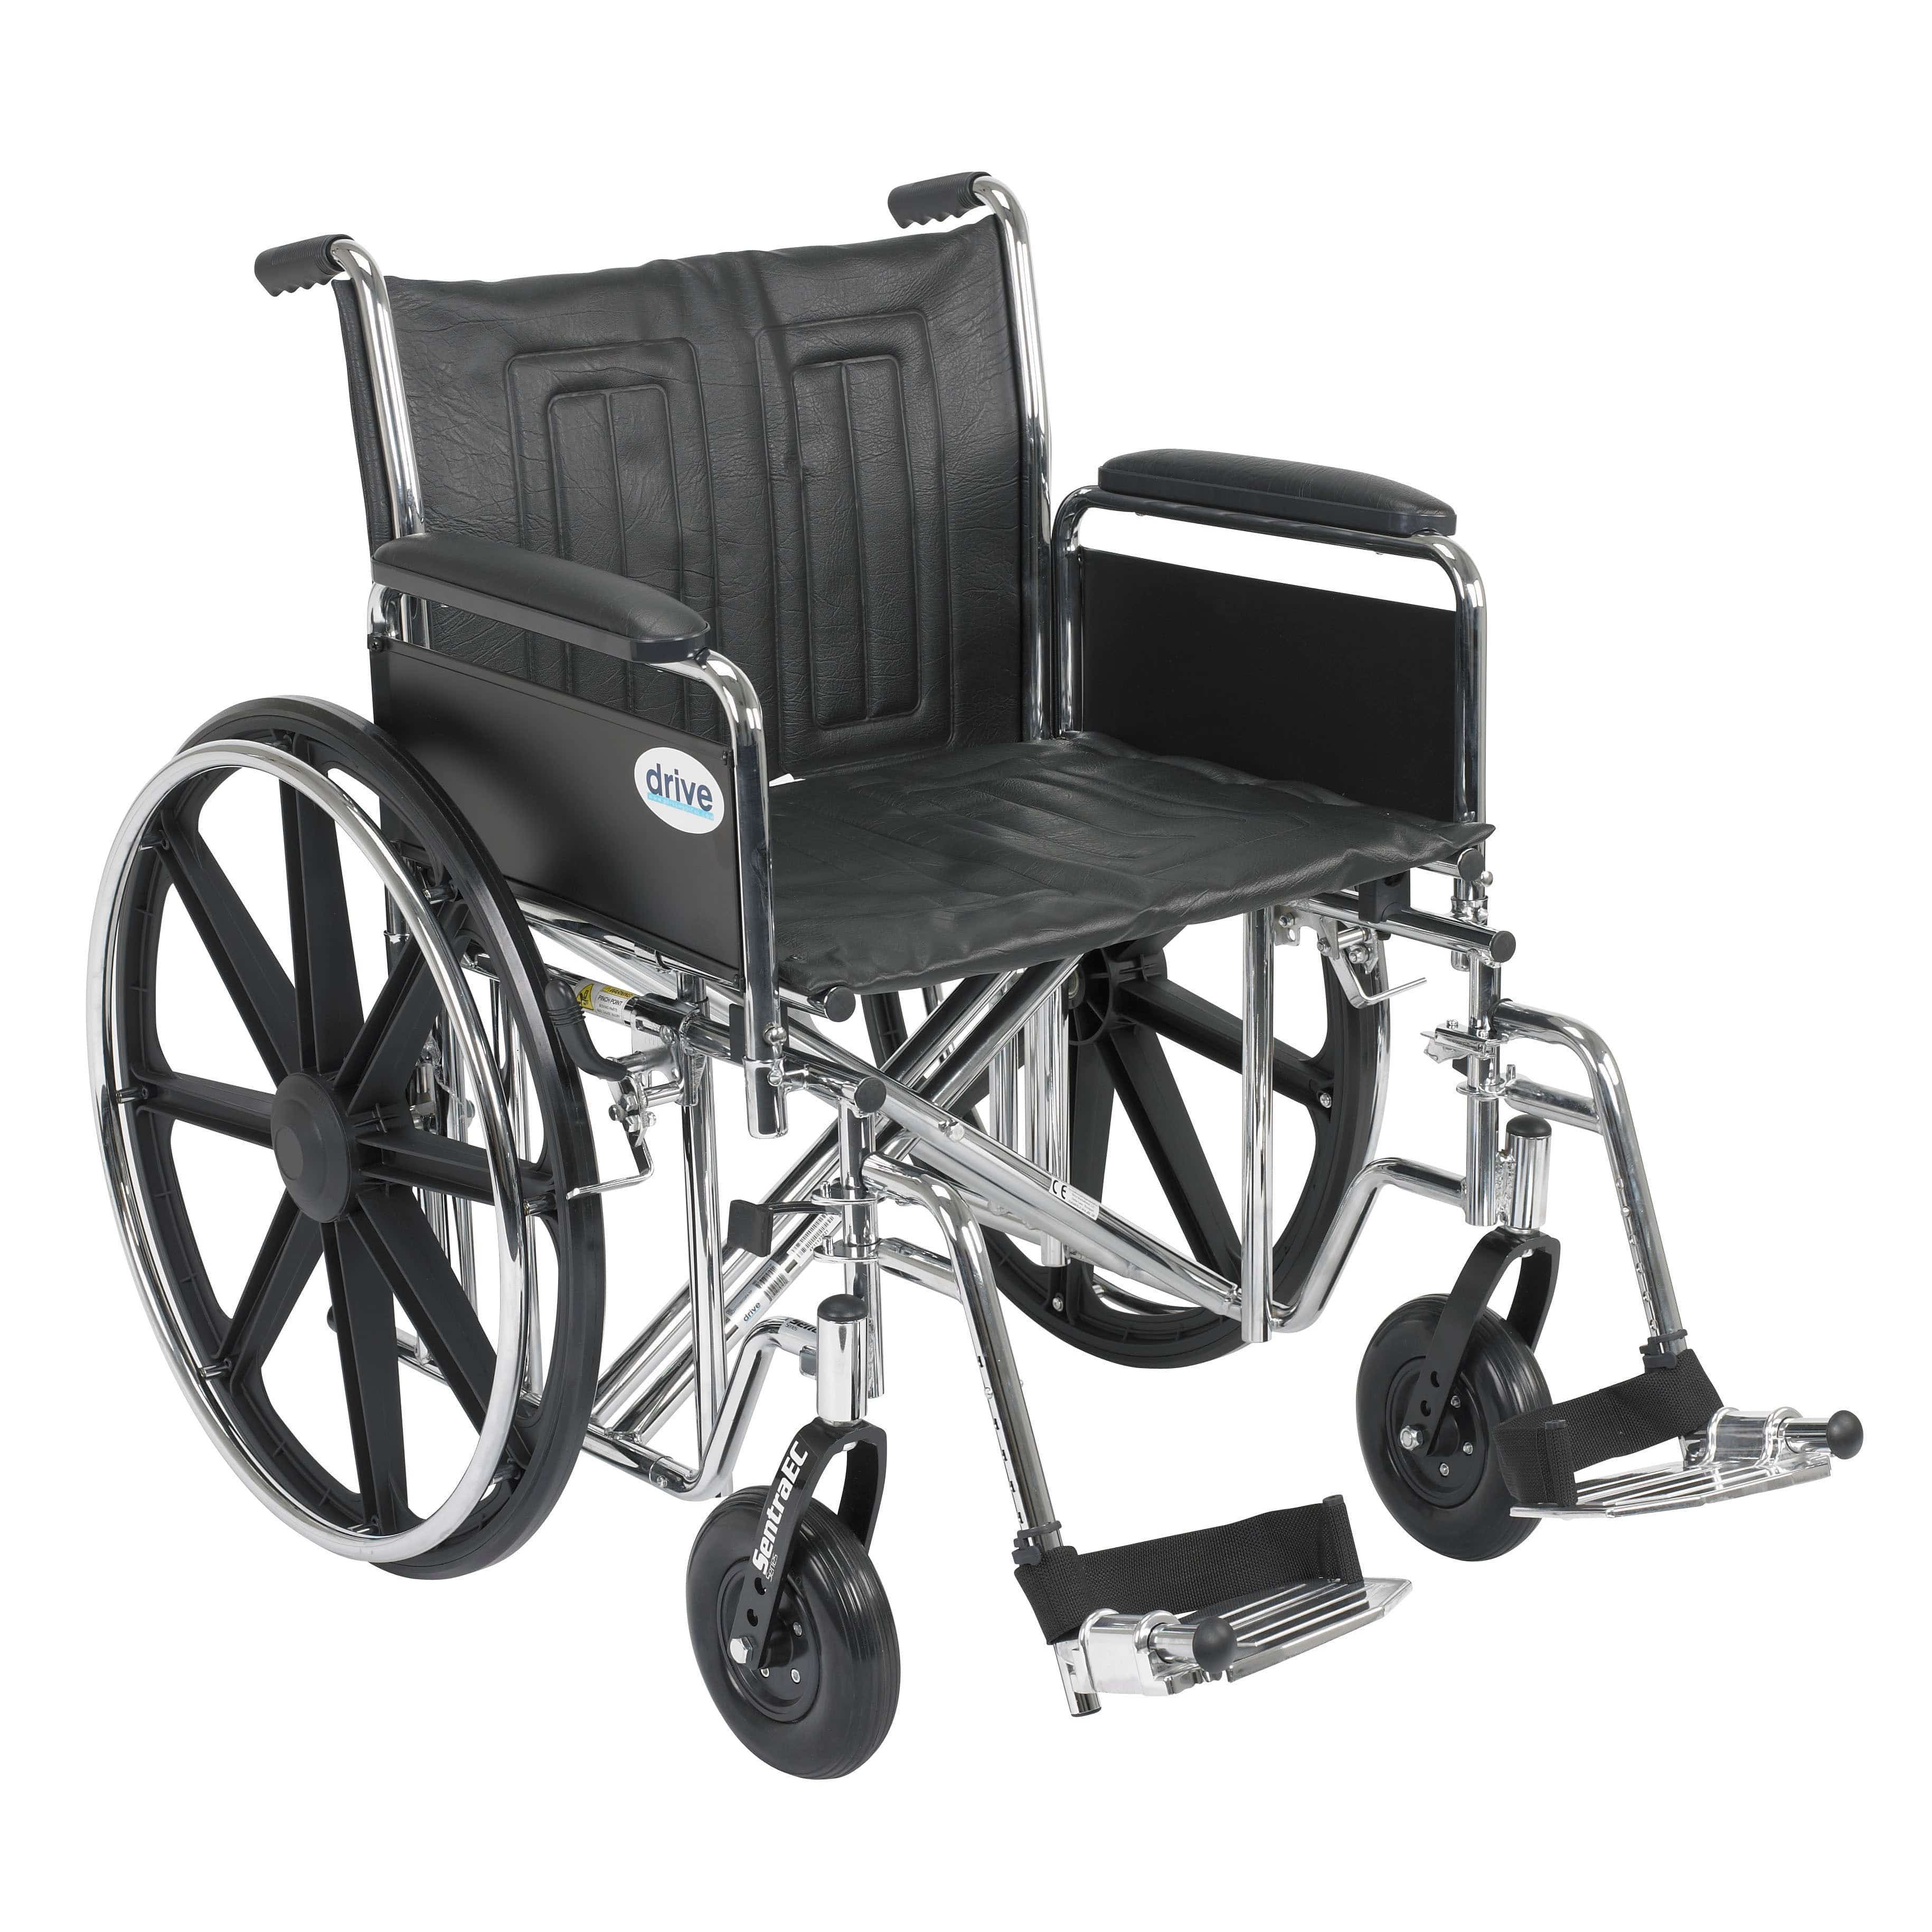 Drive Medical Wheelchairs Detachable Full Arms and Swing away Footrests / 22" Seat Drive Medical Sentra EC Heavy Duty Wheelchair